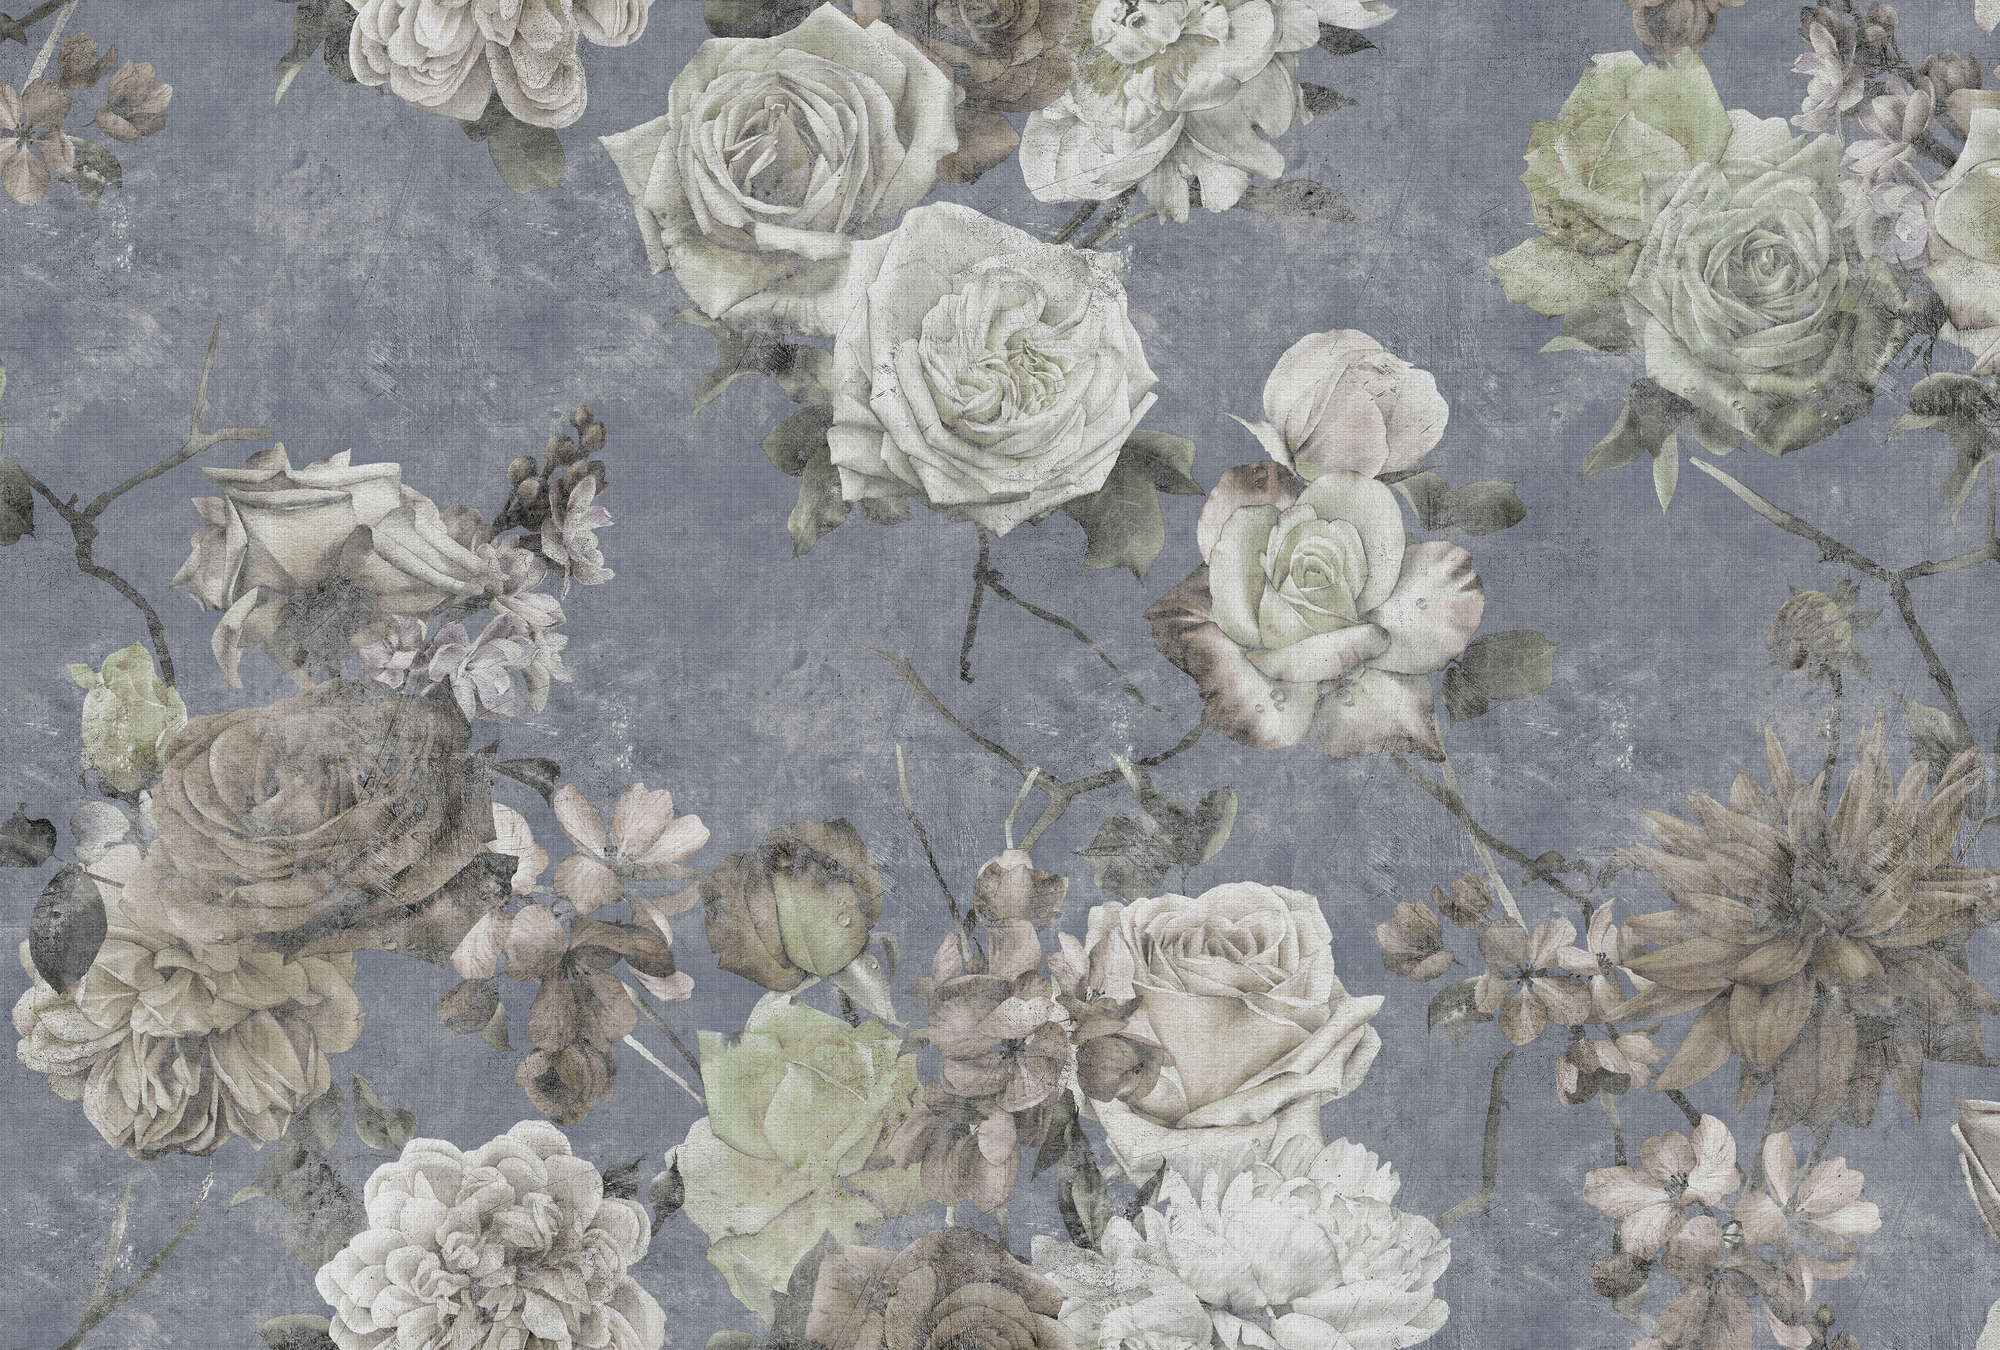             Sleeping Beauty 3 - Rose Wallpaper in Vintage Used Look- Nature Linen Texture - Blue, White | Premium Smooth Non-woven
        